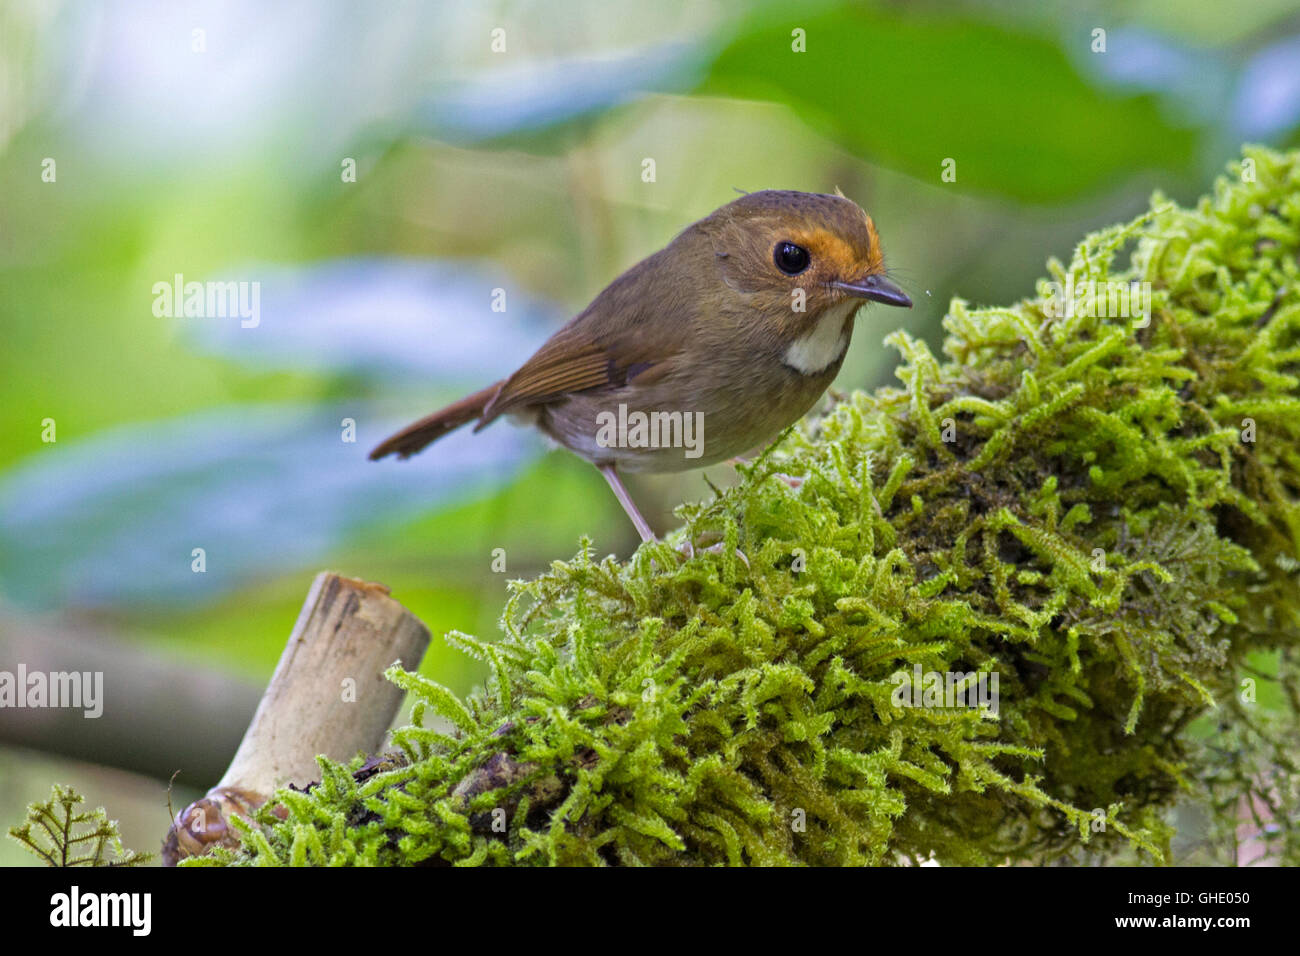 A Rufous-browed Flycatcher (Anthipes solitaris submoniliger) perched on a moss-covered branch in the Thai forest Stock Photo